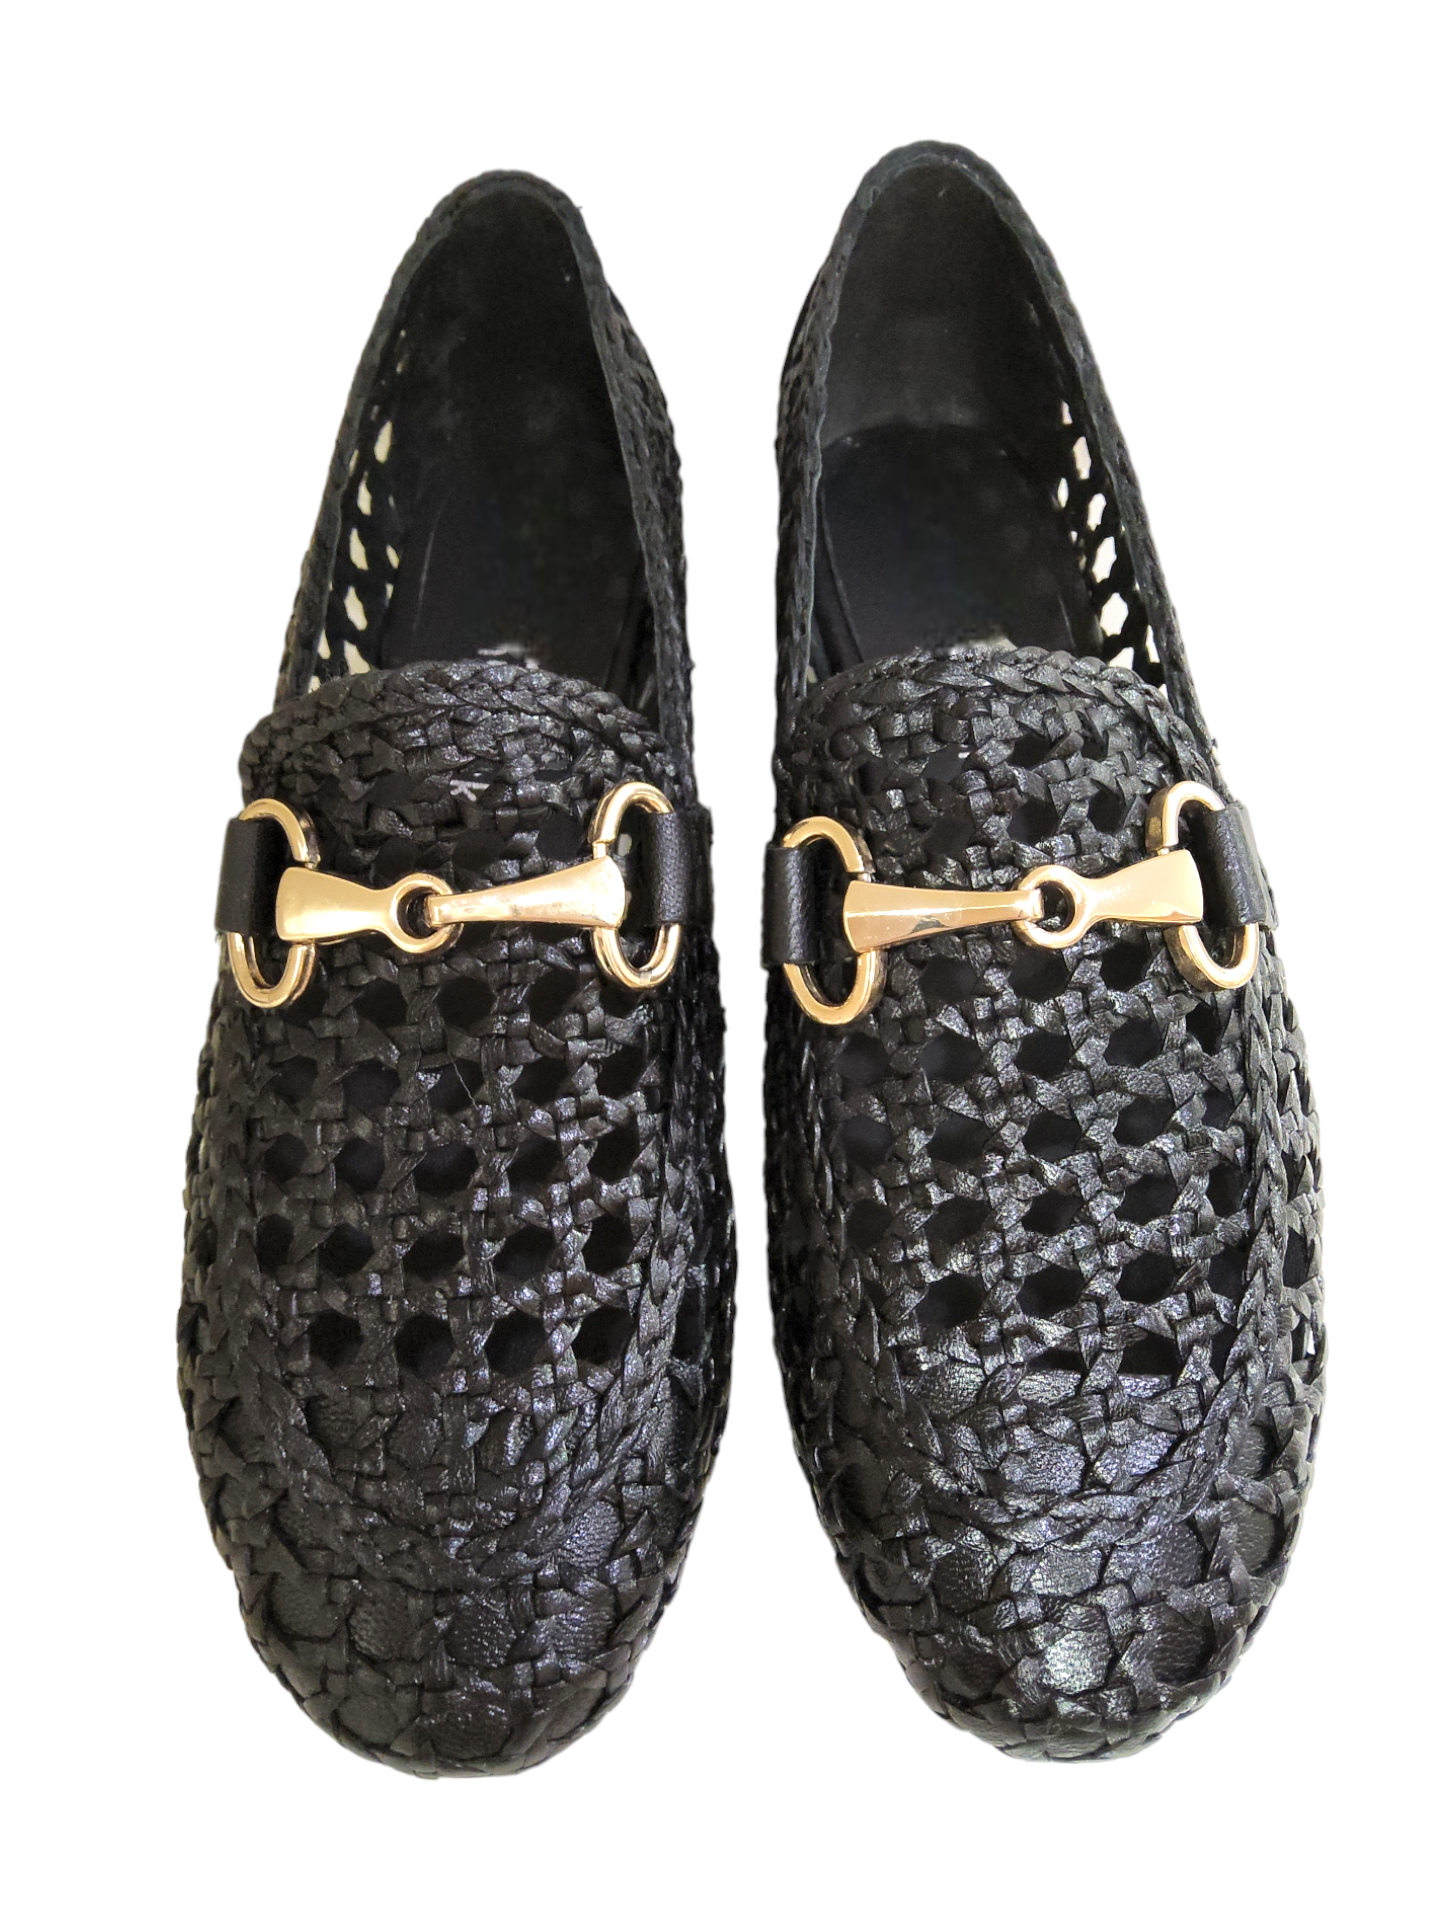 Black weave leather loafers